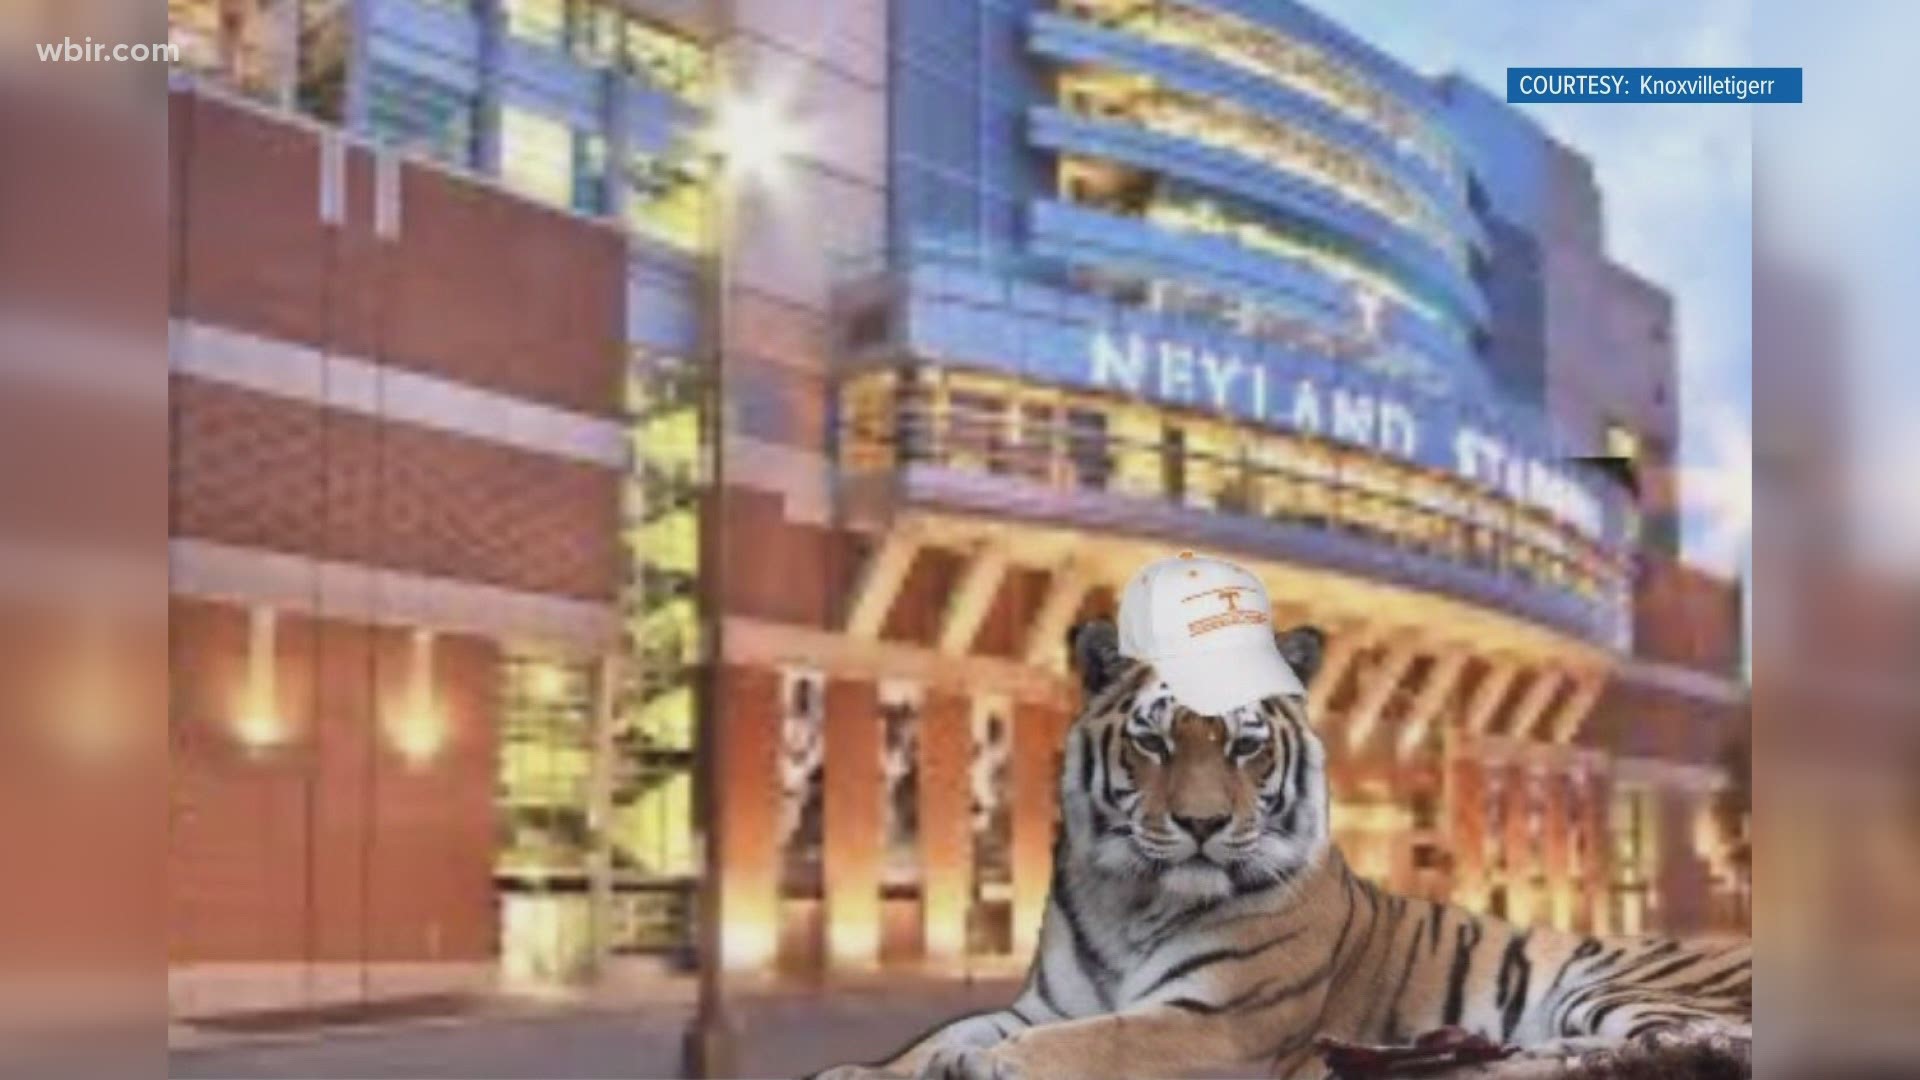 Authorities may not have found the alleged tiger in Knoxville, but it's making itself known on social media.